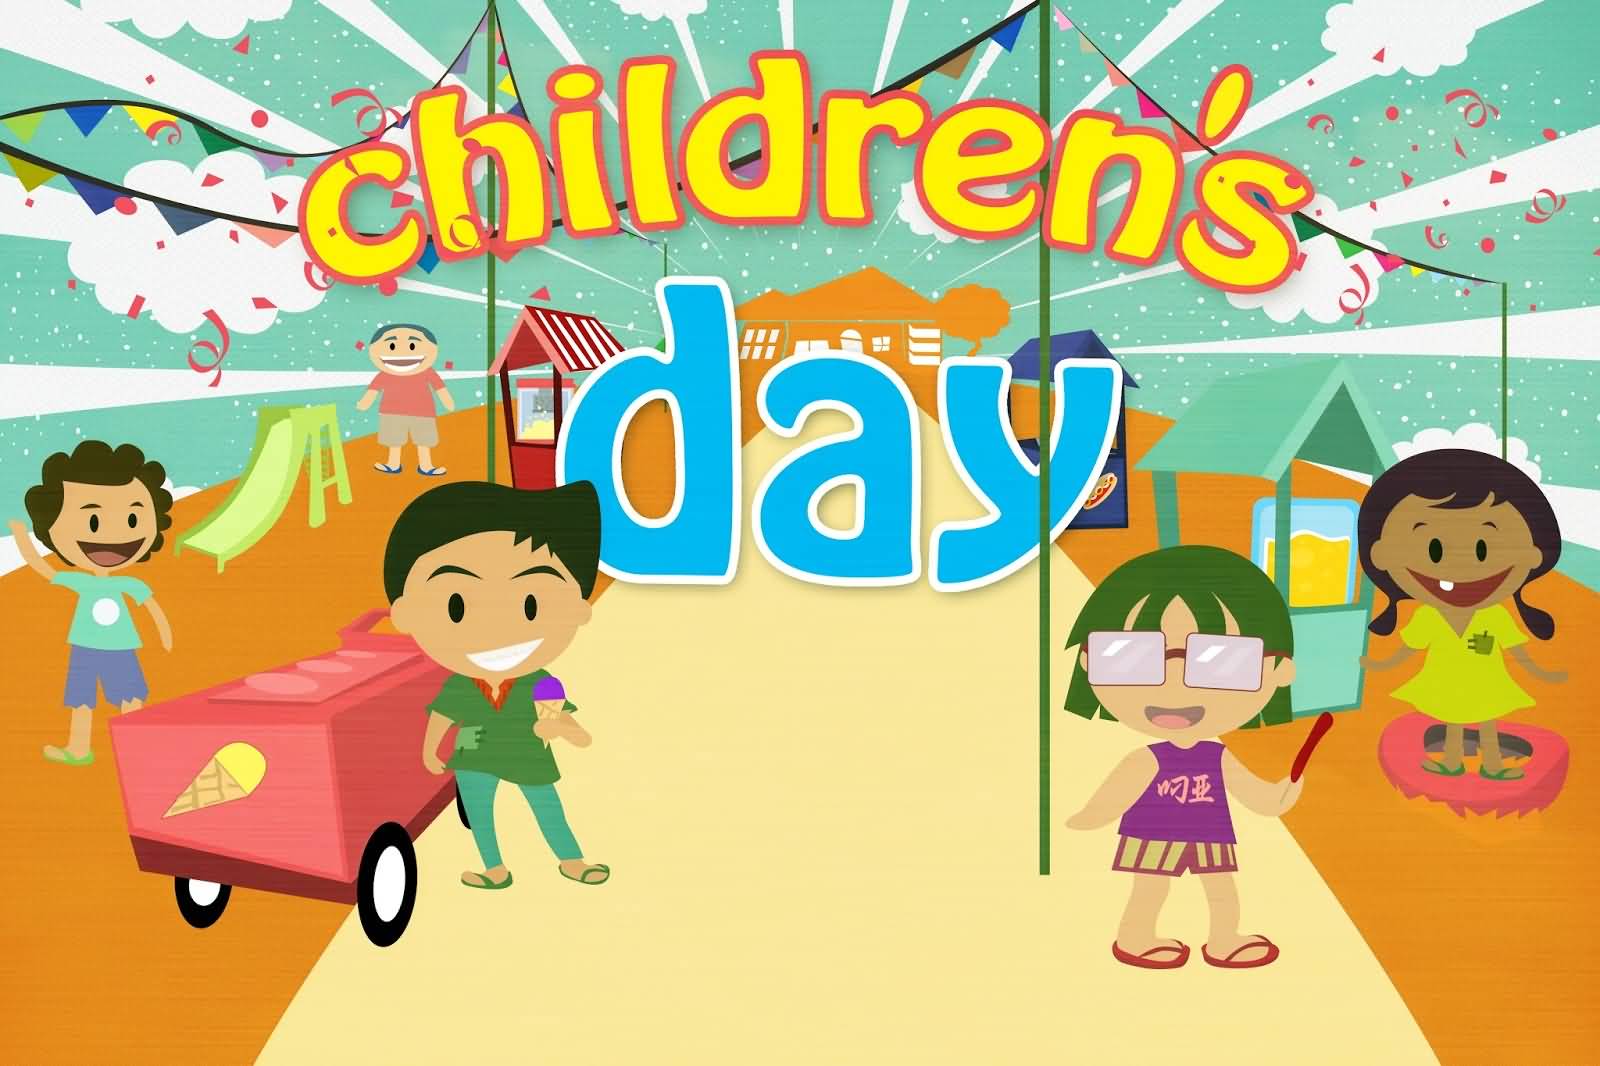 Wish You All Happy Children's Day 2016